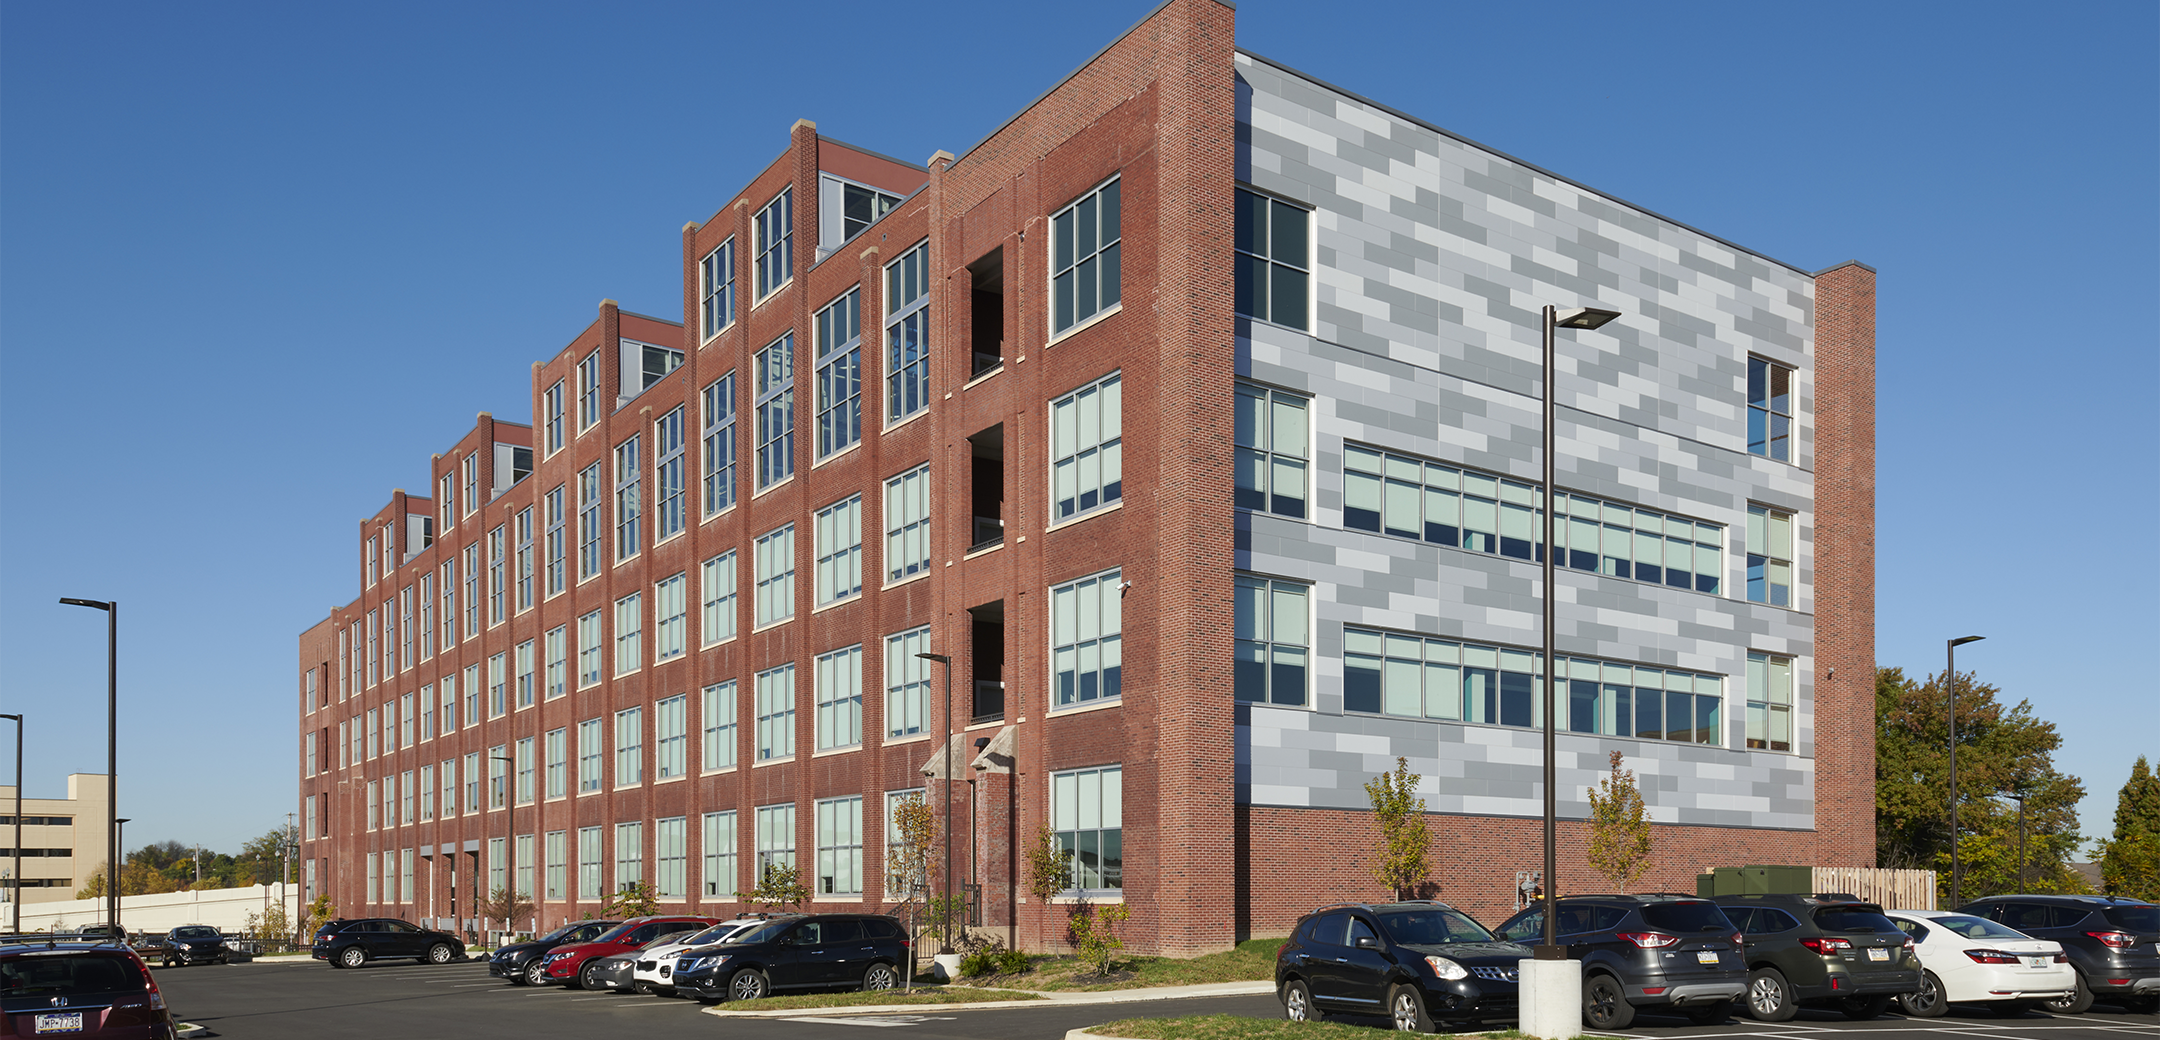 An angled view of a five-story, Class A, brick office building for UGI Energy Services with multiple windows and a metal panel-clad side exterior in the The Knitting Mills mixed-use campus.